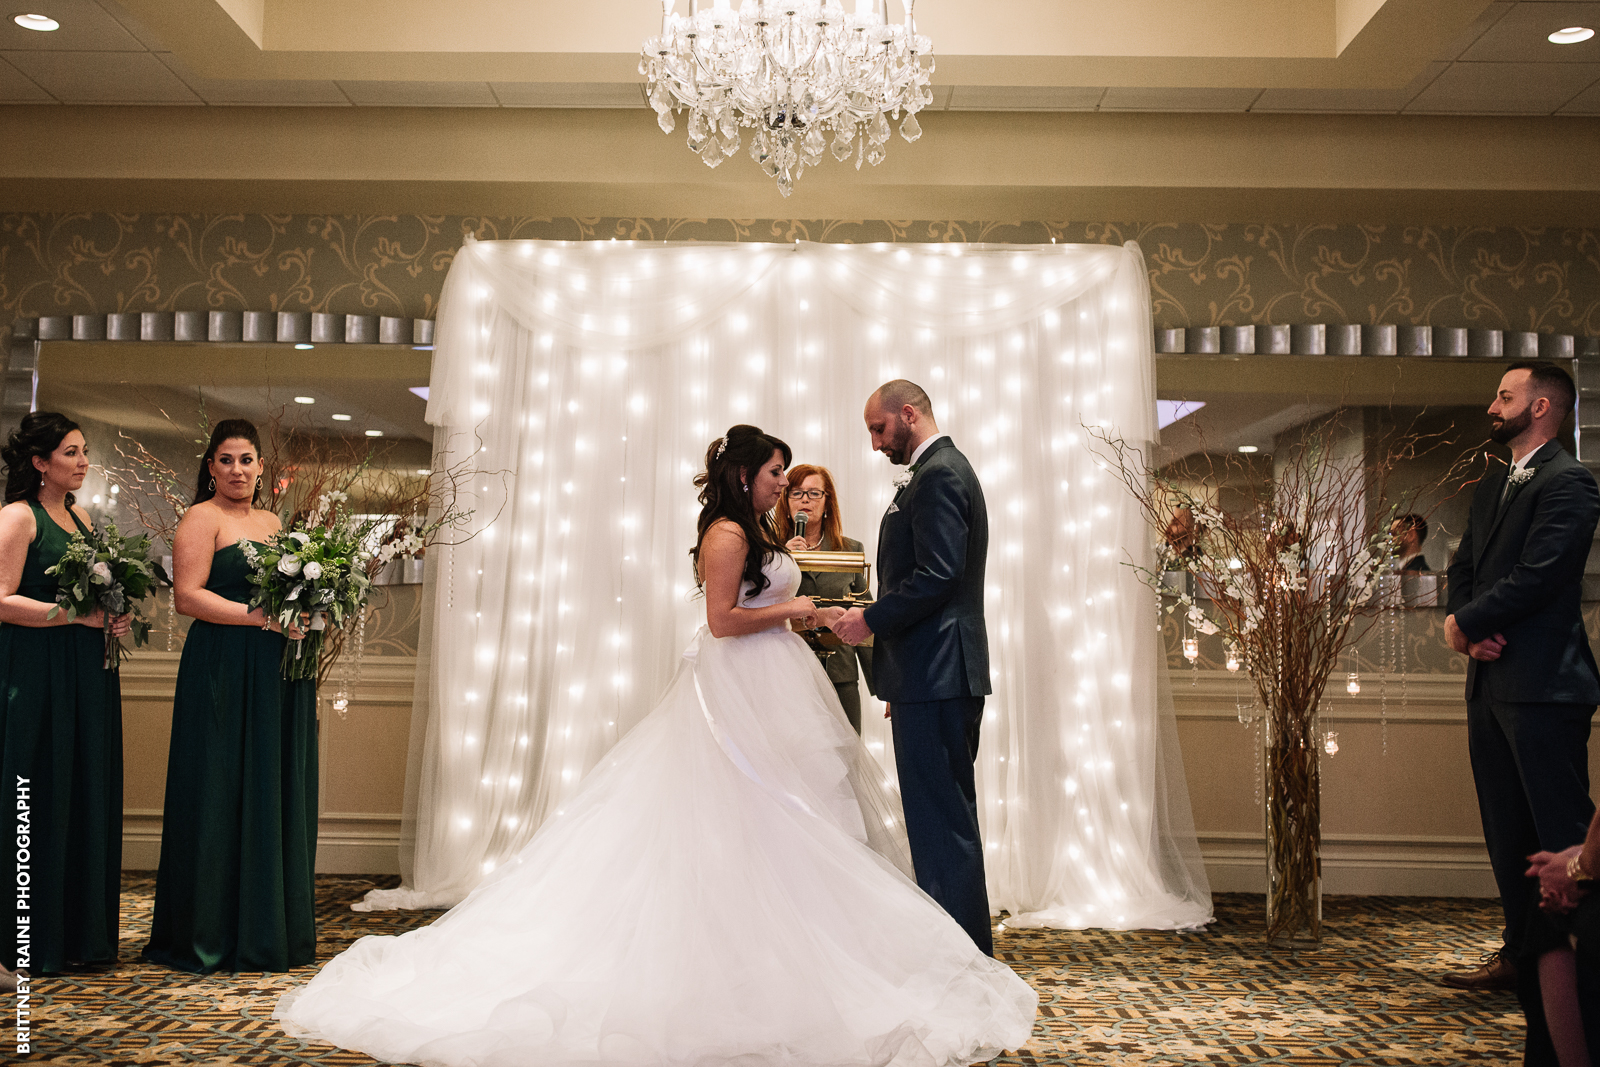 We love the sparkly backdrop Stephanie and Tyler used for their ceremony in the Emerald Ballroom!